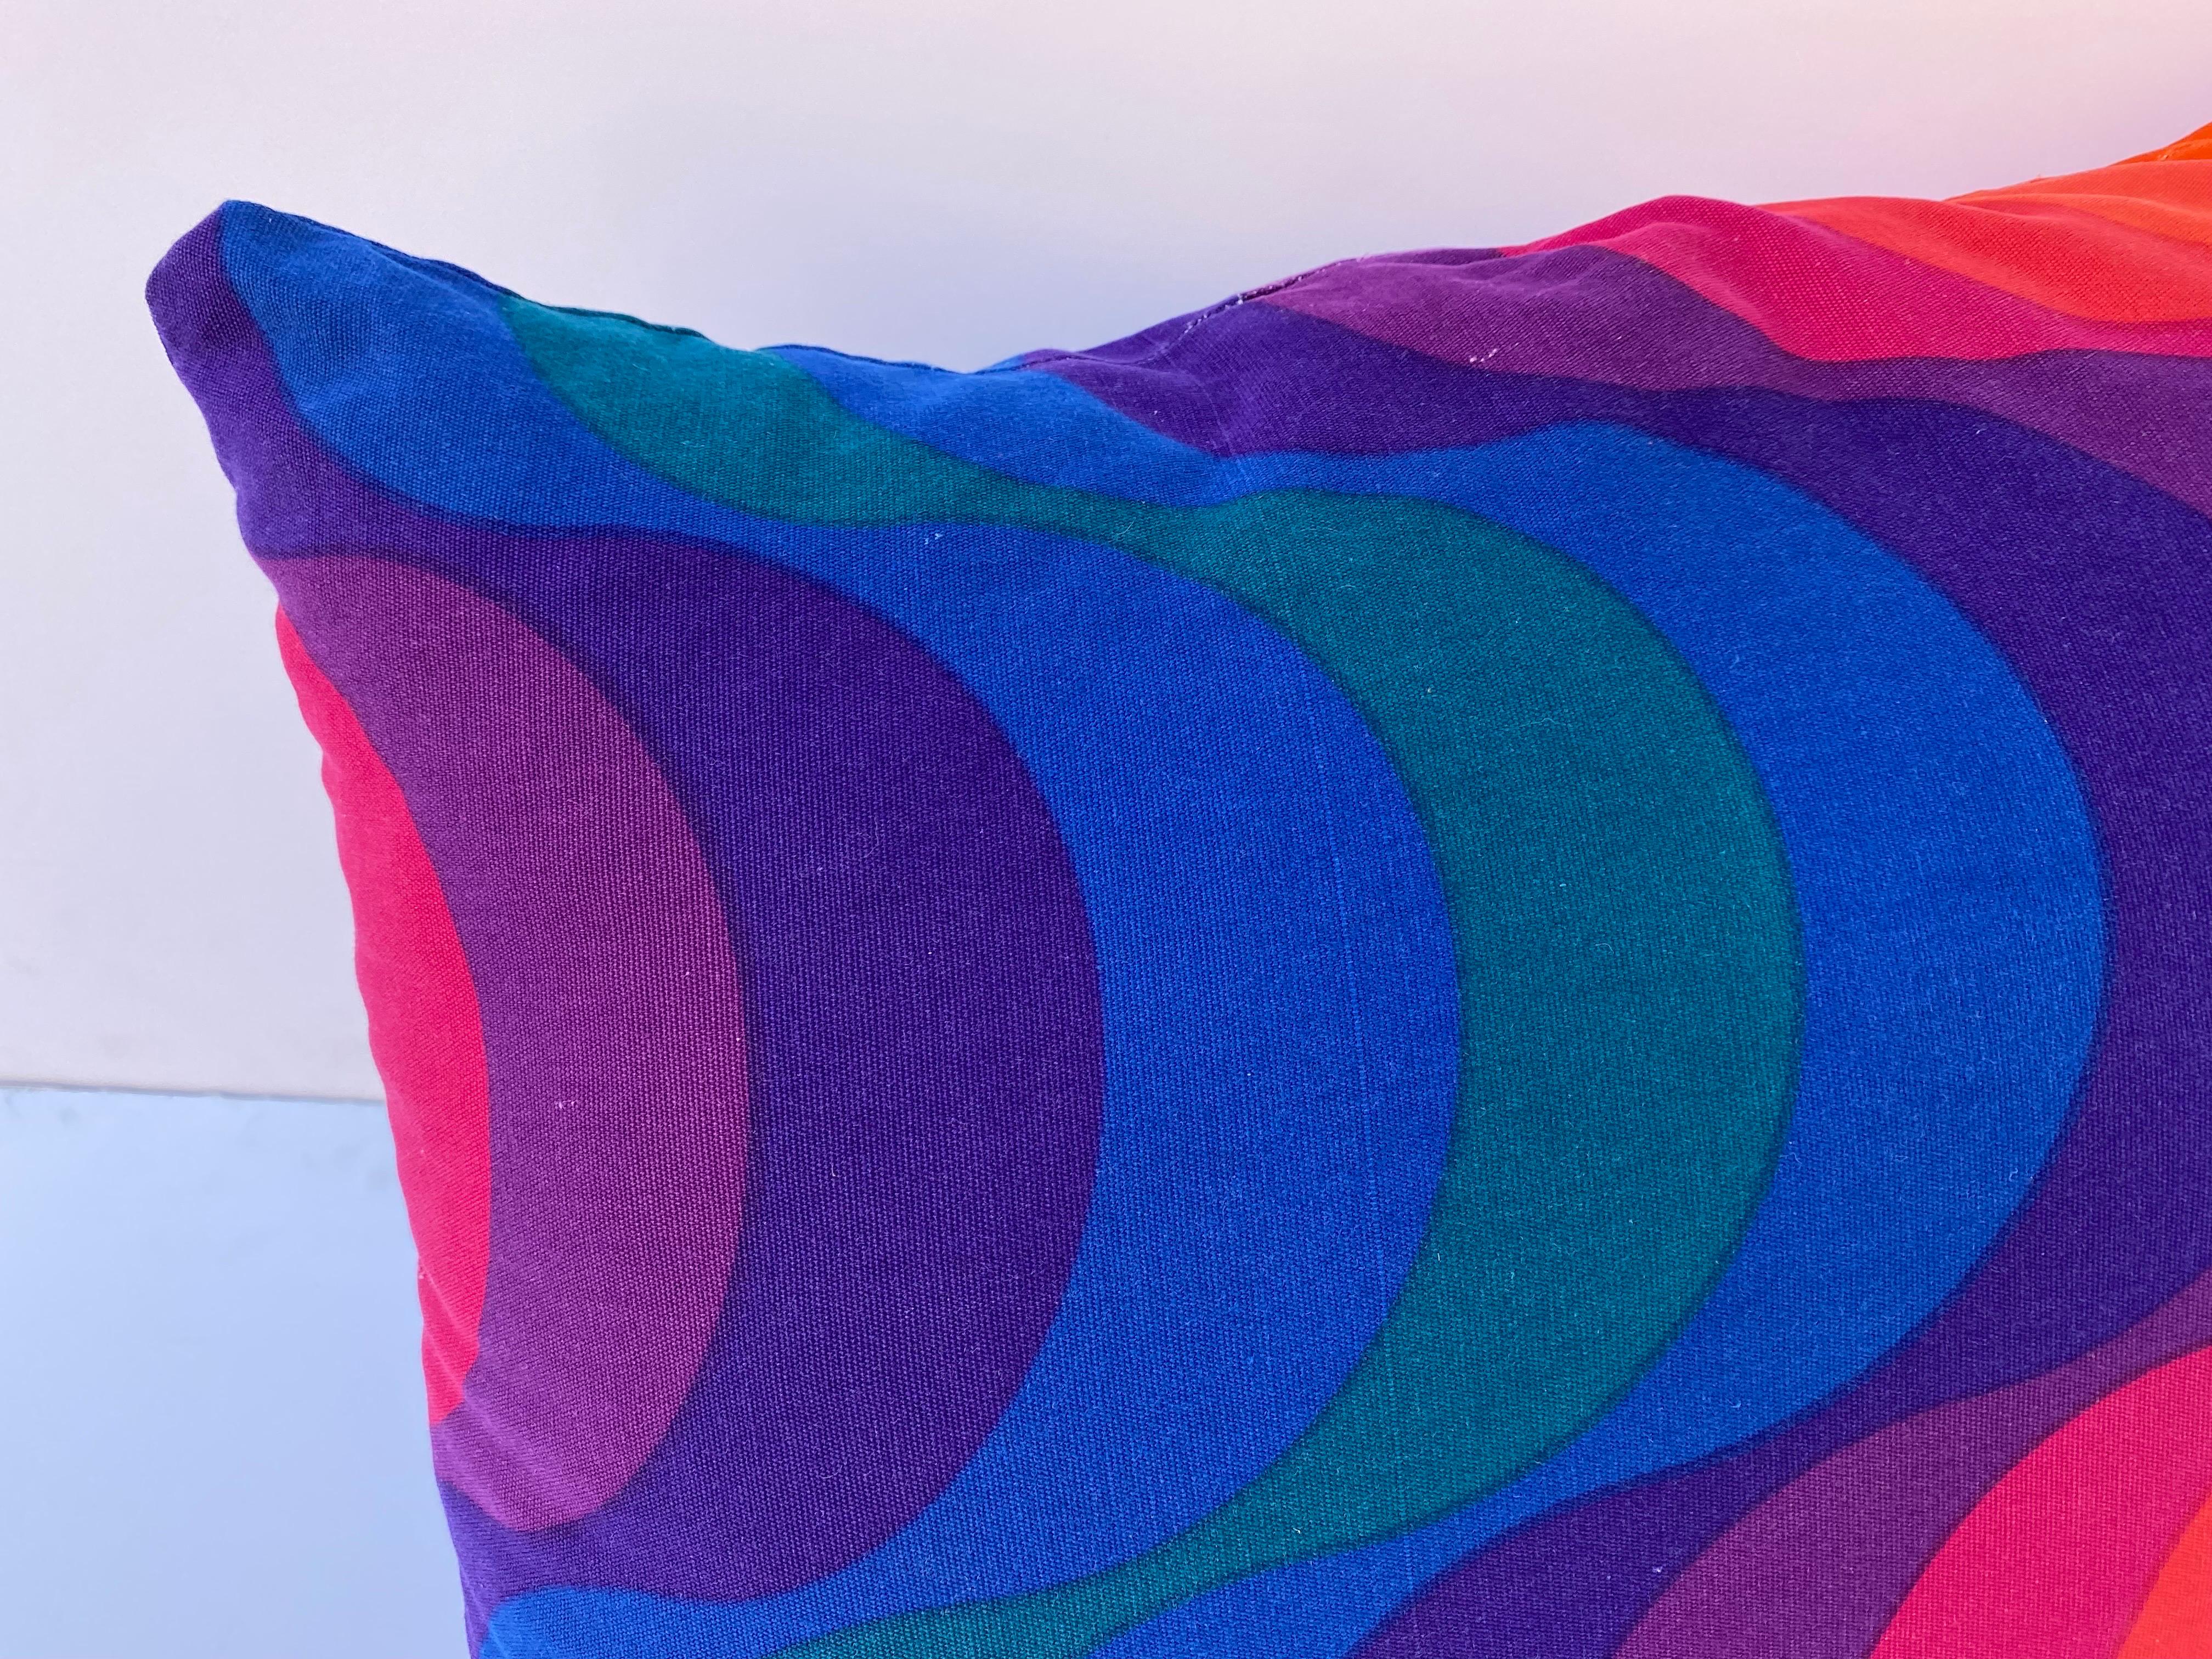 Original Verner Panton Mira-X Fabric made into a pillow in about 1970. Insides still fluffy and fabric unfaded and in great shape!